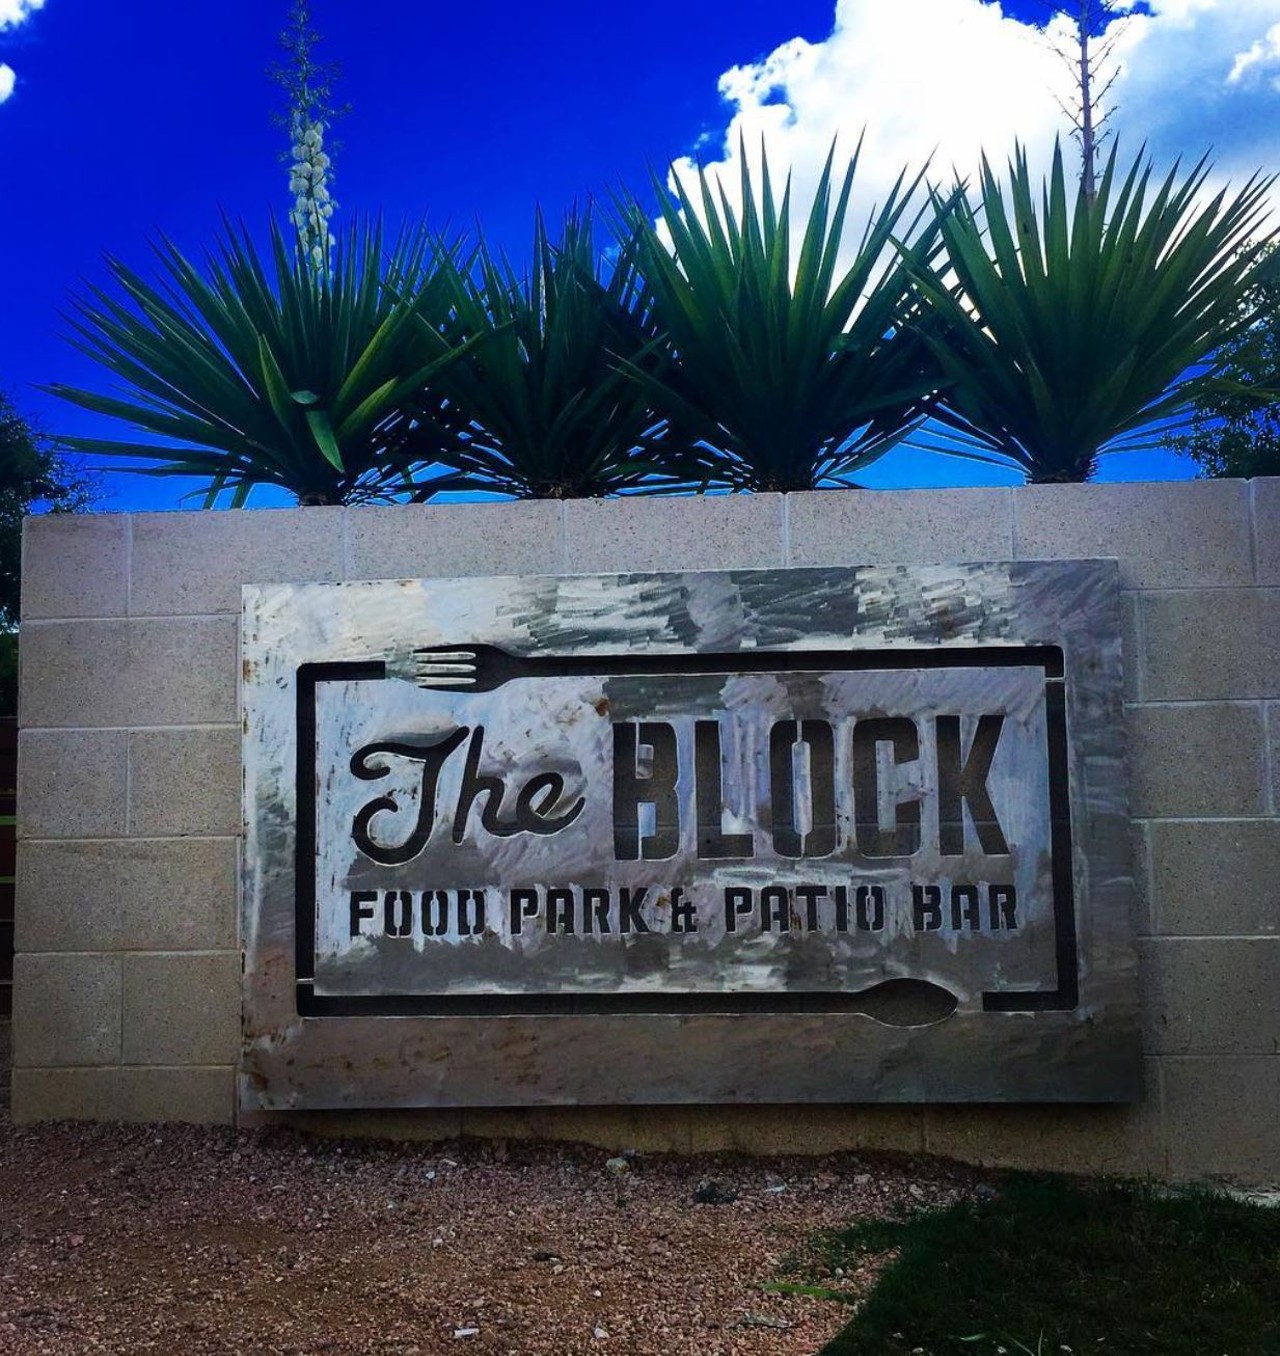 Explore all the food trucks at The Block
14530 Roadrunner Way, (210) 690-3333, theblocksa.com
New and located near UTSA, The Block is home to both a bar and different food trucks with a rotating schedule. This week, they’re featuring Curb, Bullgogiboys, Mr Fish, Go Vegan, Golden Street Tacos, and Homies Kitchen. The best part is that when you ask your lovely what they’d like to eat, you don’t have to agree on a place. Win win!
Photo via Instagram / theblocksa